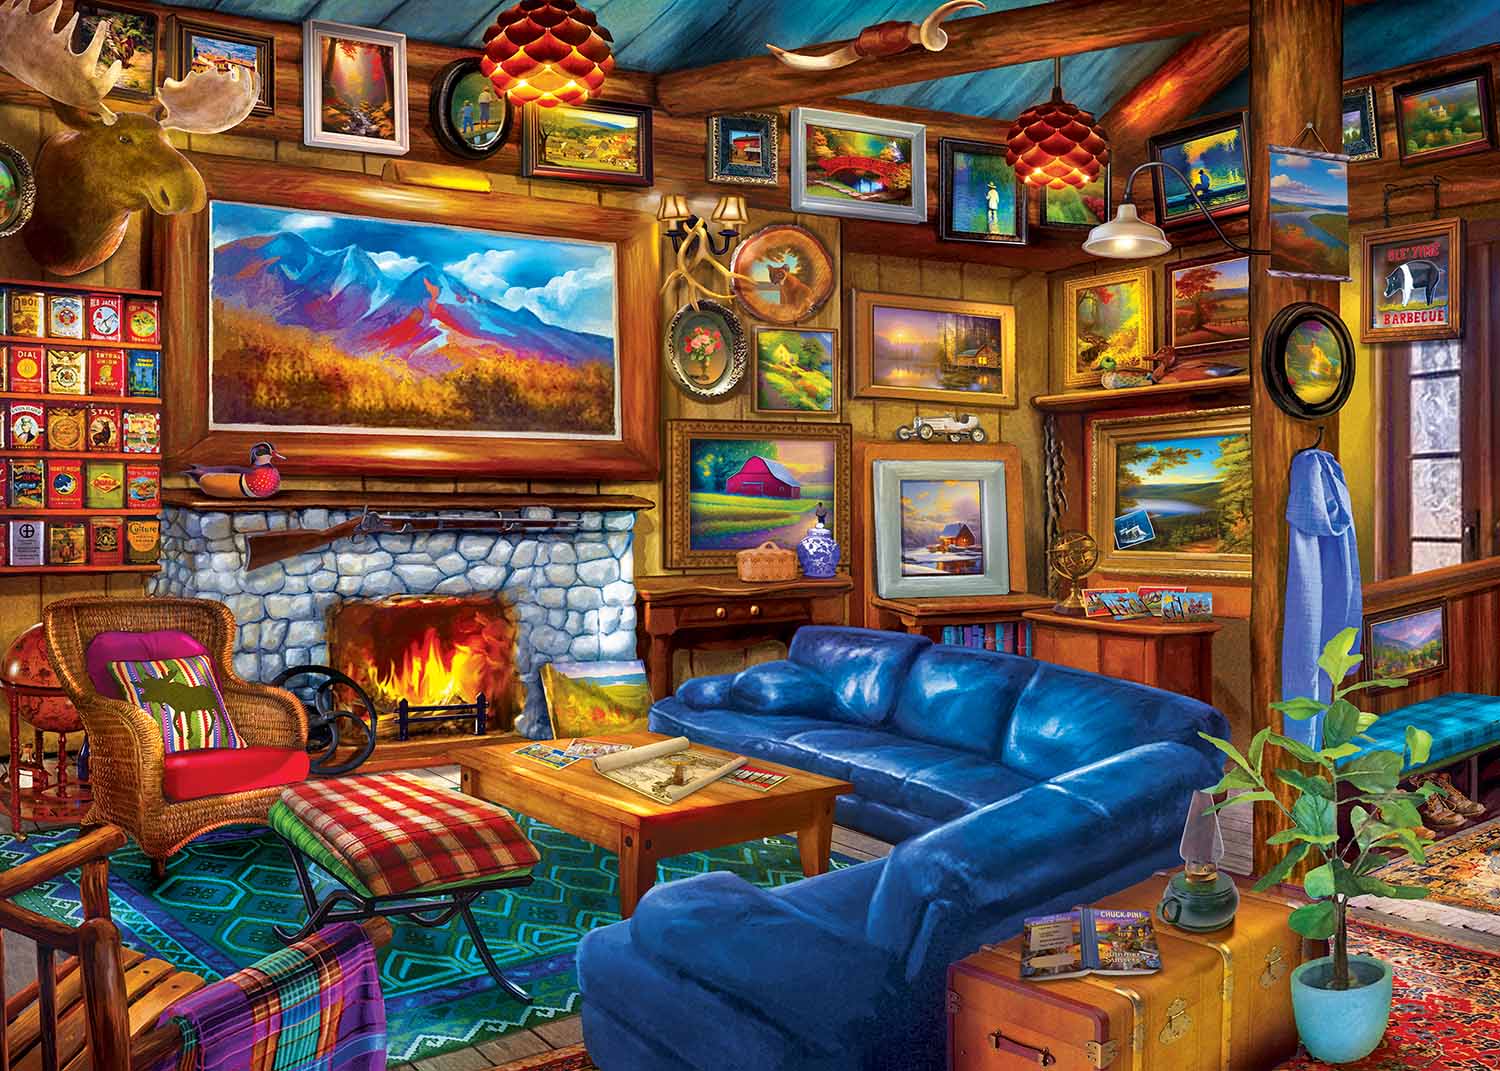 Home Sweet Home - Artistic Retreat  Around the House Jigsaw Puzzle